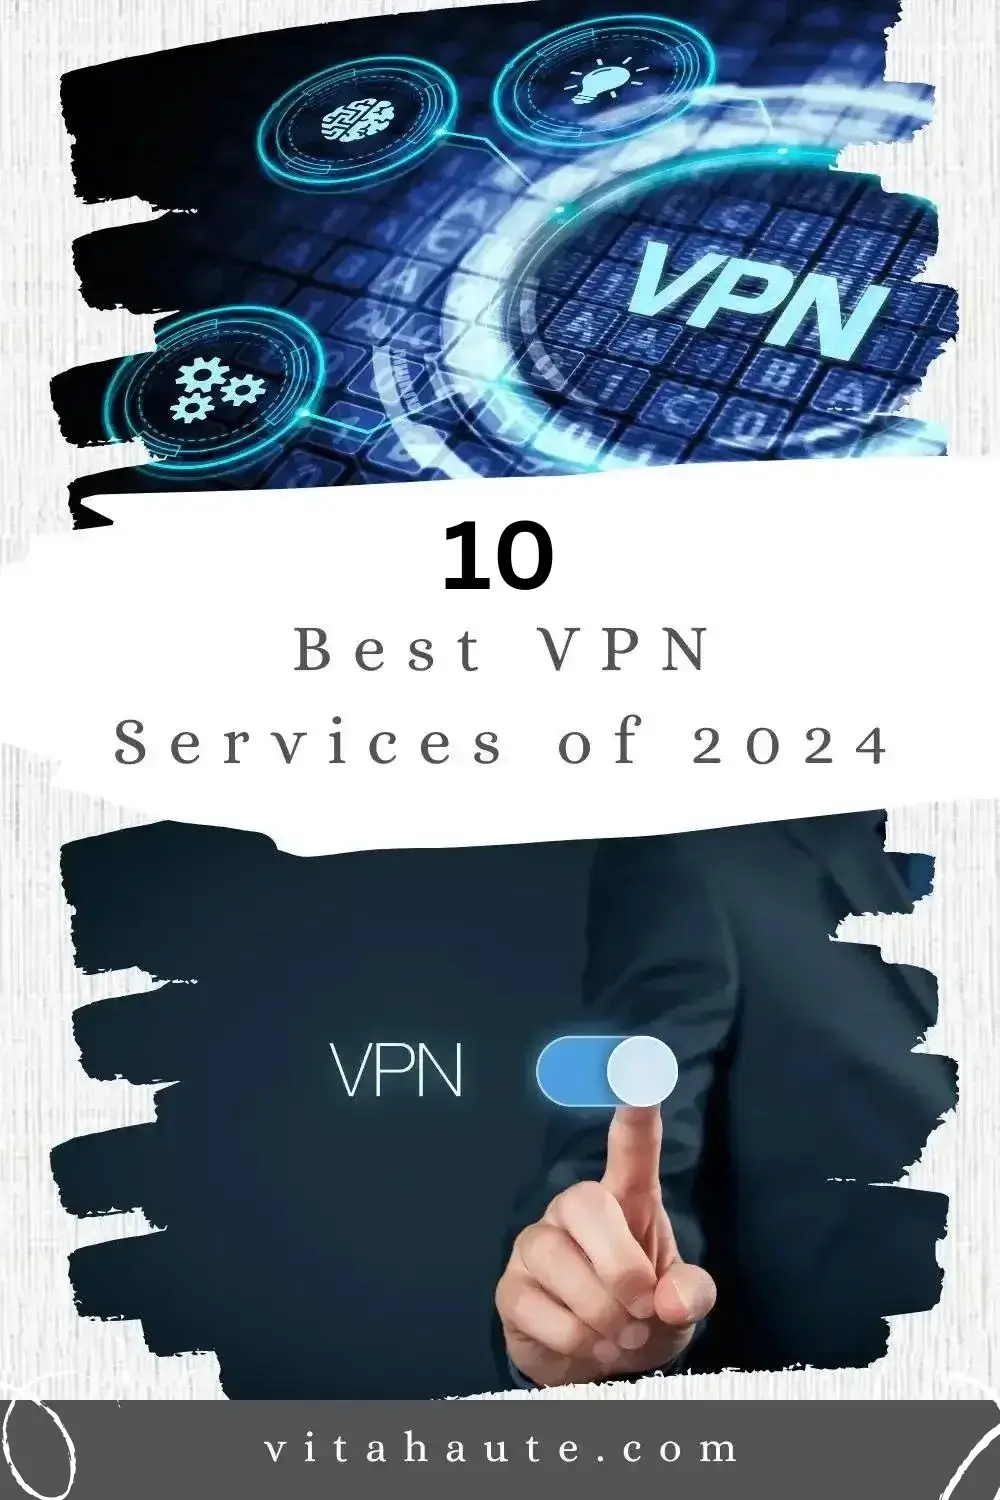 Icons for a variety of VPN services